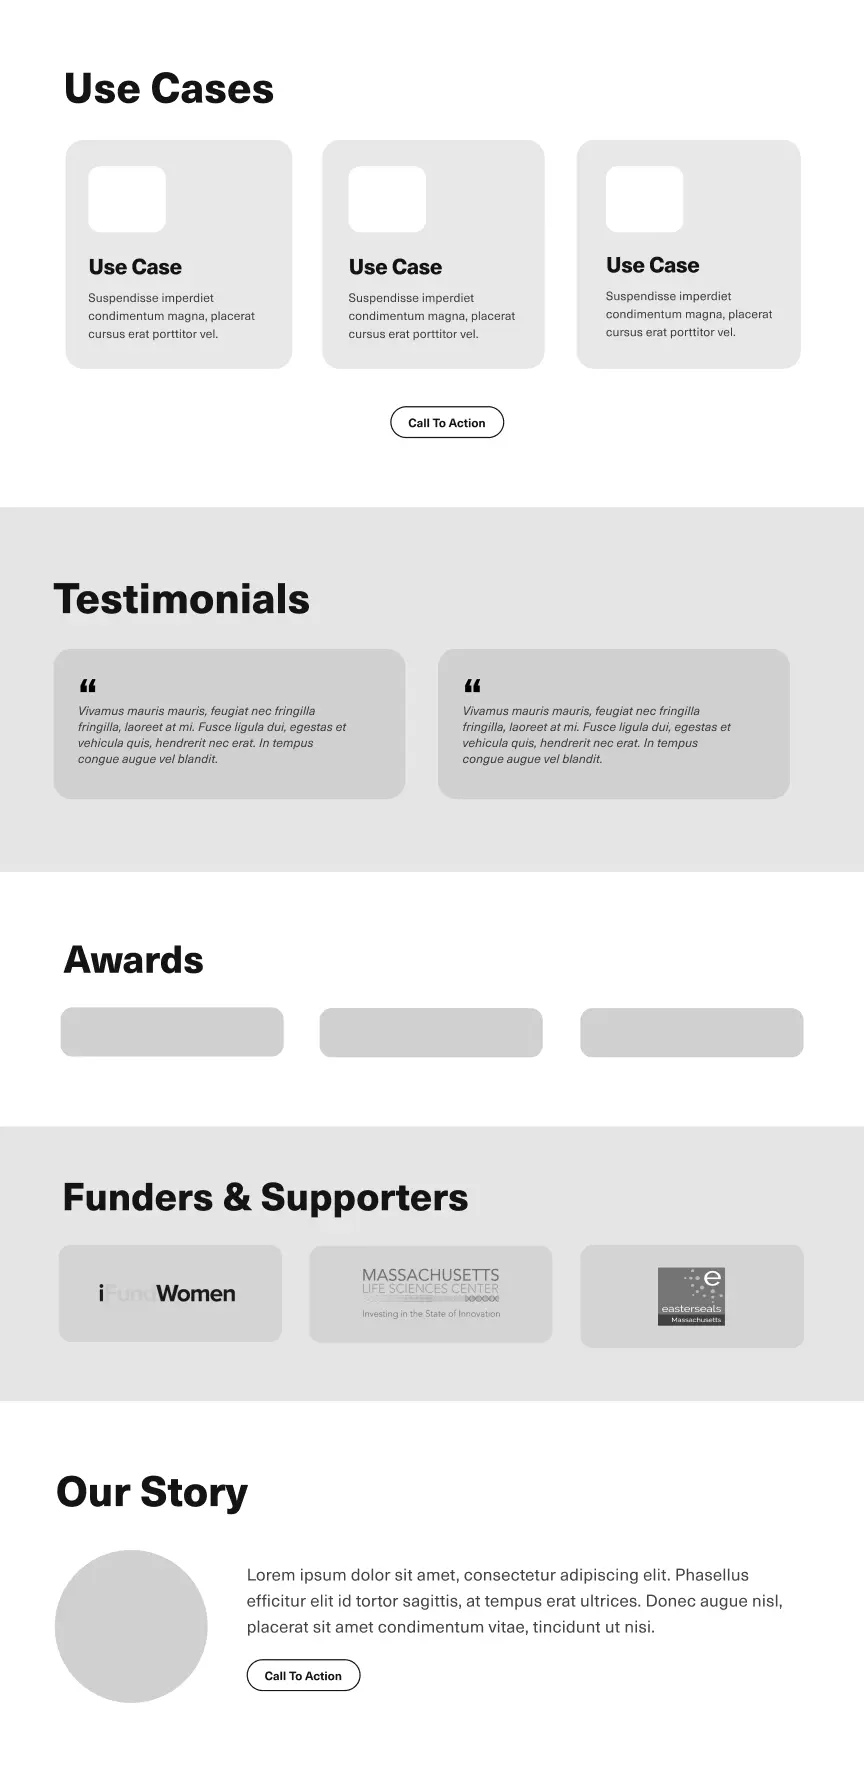 Bottom half of desktop homepage wireframe. First section titled 'Use Cases' above three cards (small image box and text) and button. Second section titled 'Testimonials' above row of two quotes. Third section titled 'Awards' shows three image boxes. Fourth section titled 'Funders & Supporters' shows three logos (iFundWomen, Massachusetts Life Sciences Center and Easterseals). Fifth section titled 'Our Story' above image box next to text and button.